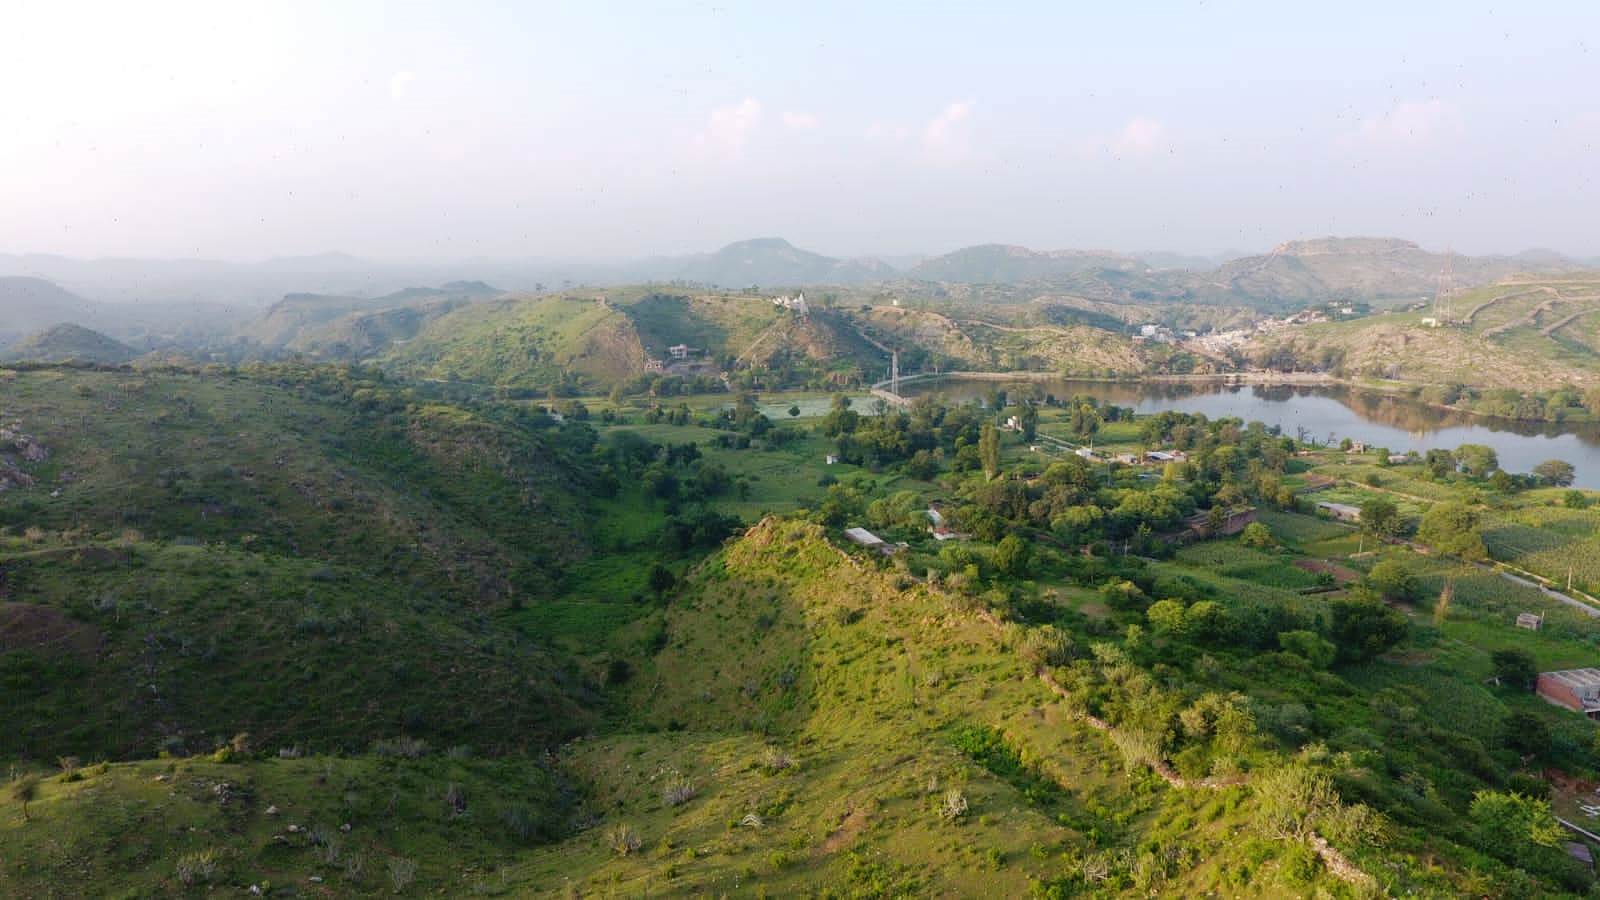 Commercial Converted Land for Sale in Udaipur Rajasthan